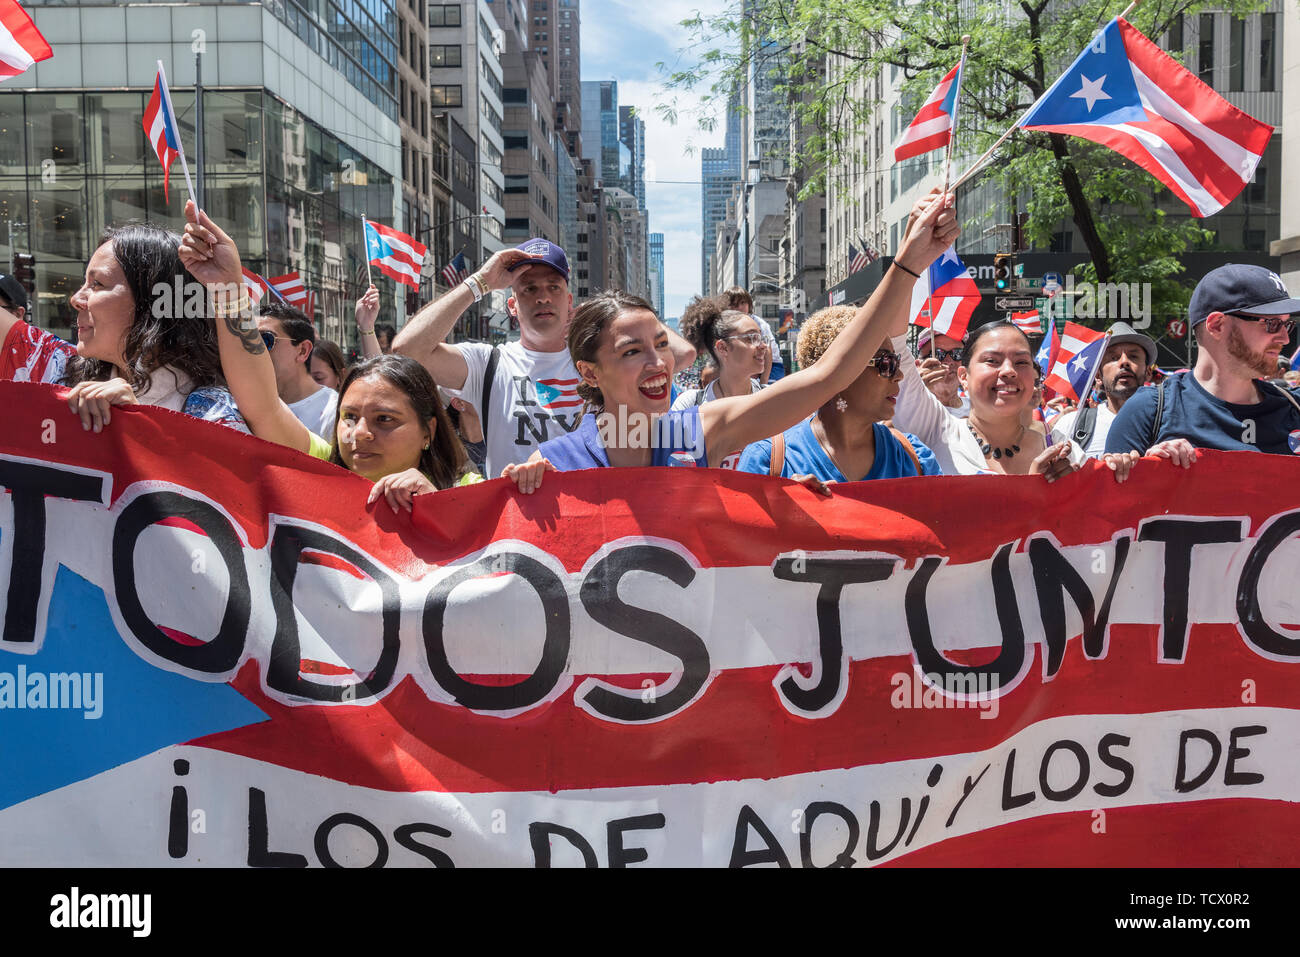 New York, USA. 09th June, 2019. Congresswoman Alexandria Ocasio-Cortez - On June 9, 2019, millions of people lined the streets along 5th Avenue in Midtown Manhattan celebrating their Puerto Rican heritage. In its 62nd year, the National Puerto Rican Day Parade is the largest parade of Puerto Rican culture. This year's theme was 'Un Pueblo, Muchas Voces' (One Nation, Many Voices) celebrating the diversity of Puerto Rico. Credit: Gabriele Holtermann-Gorden/Pacific Press/Alamy Live News Stock Photo